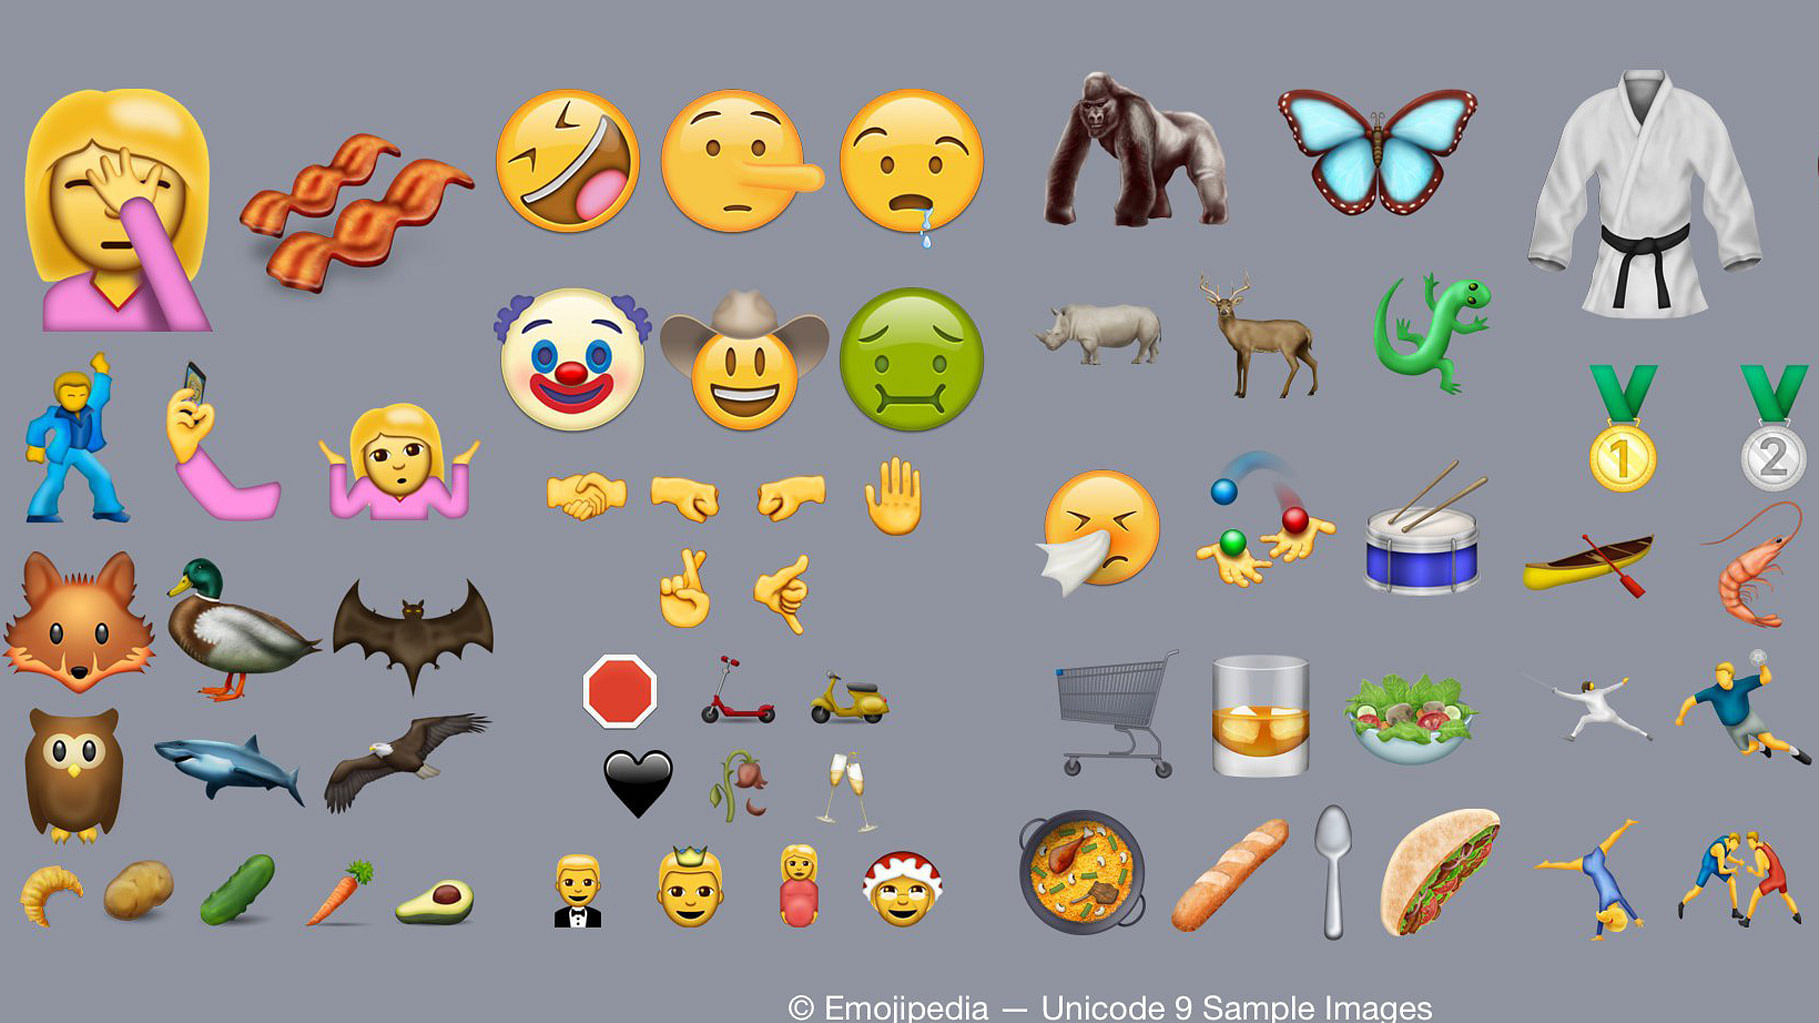 An image of some of the new emojis that have been released. (Photo: <a href="http://blog.emojipedia.org/unicode-9-0-released-with-72-new-emojis/">blog.emojipedia.org</a>)